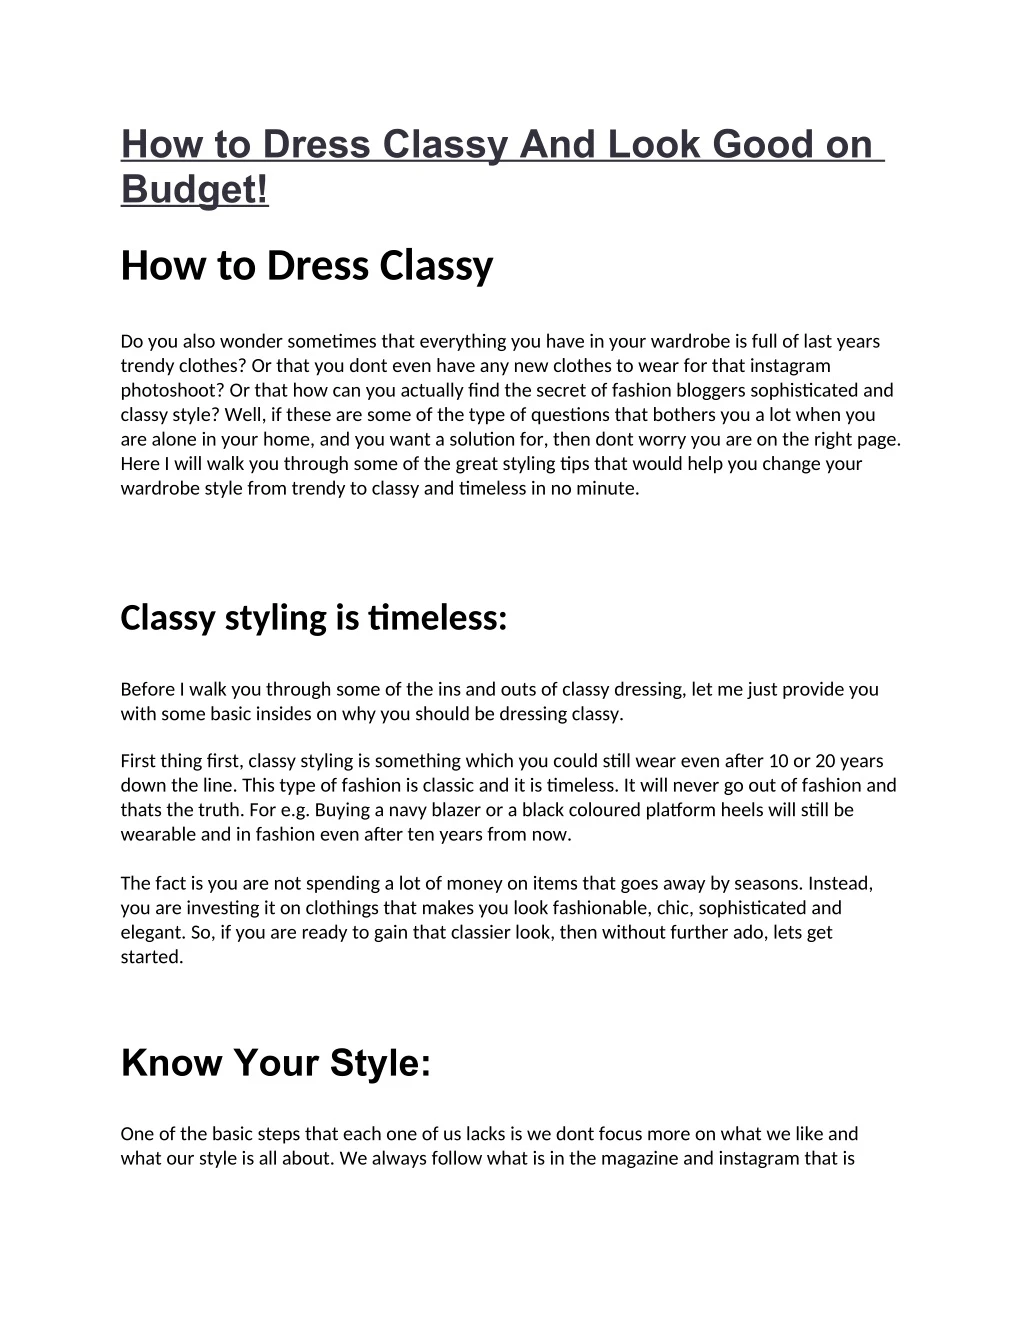 how to dress classy and look good on budget